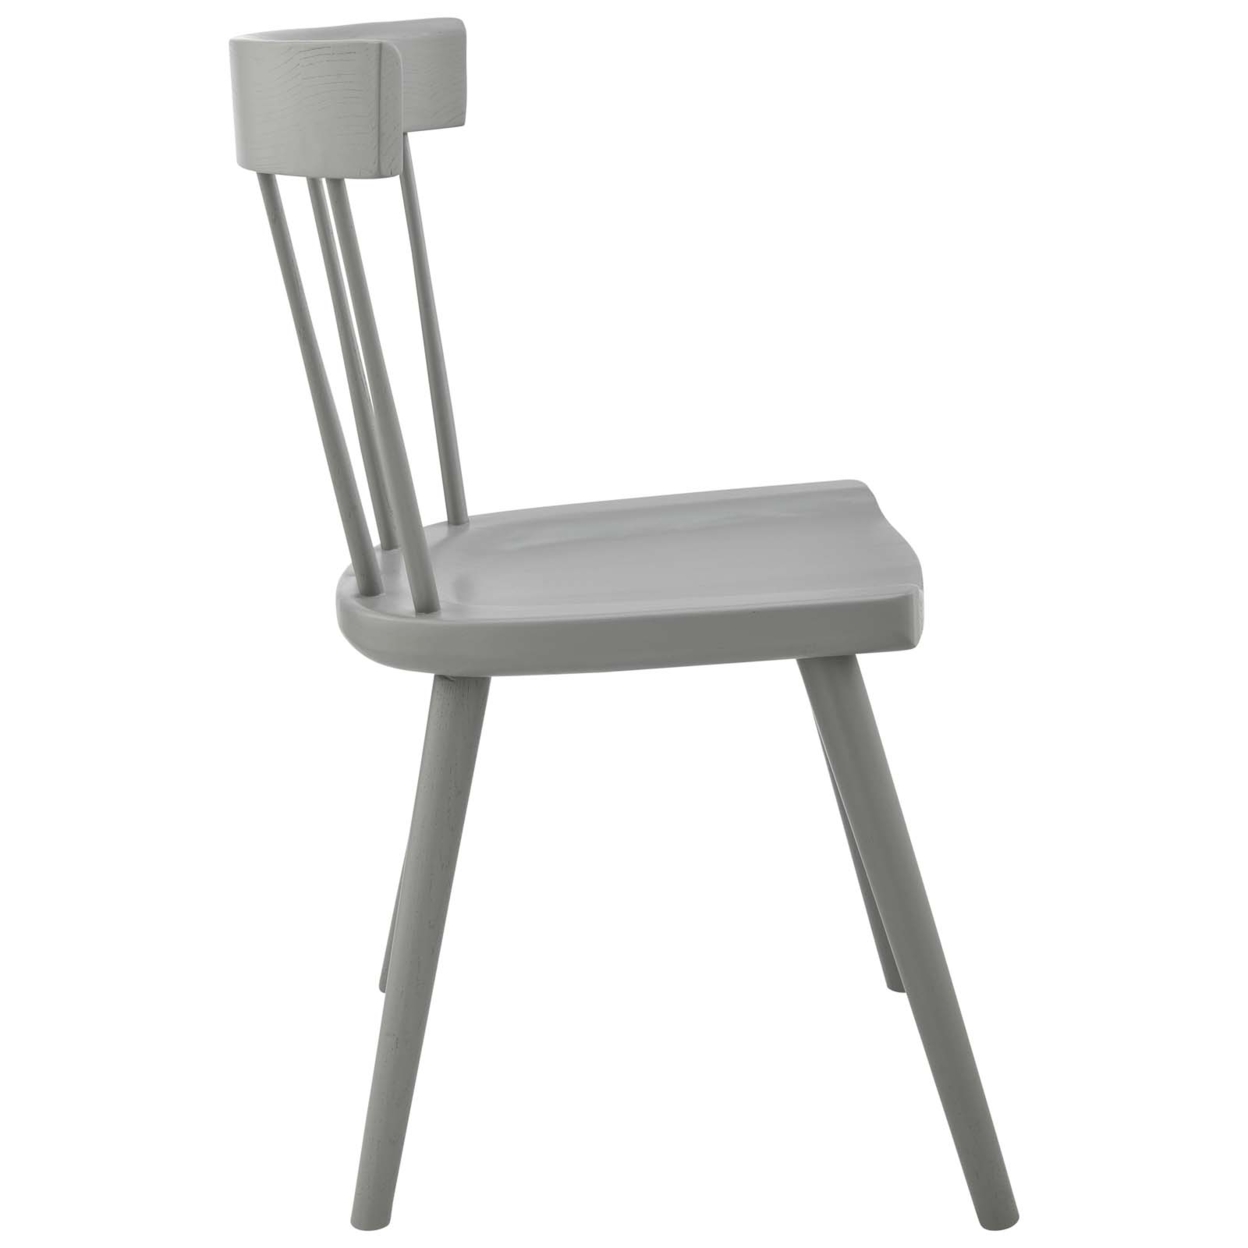 Sutter Wood Dining Side Chair Set Of 2, Light Gray